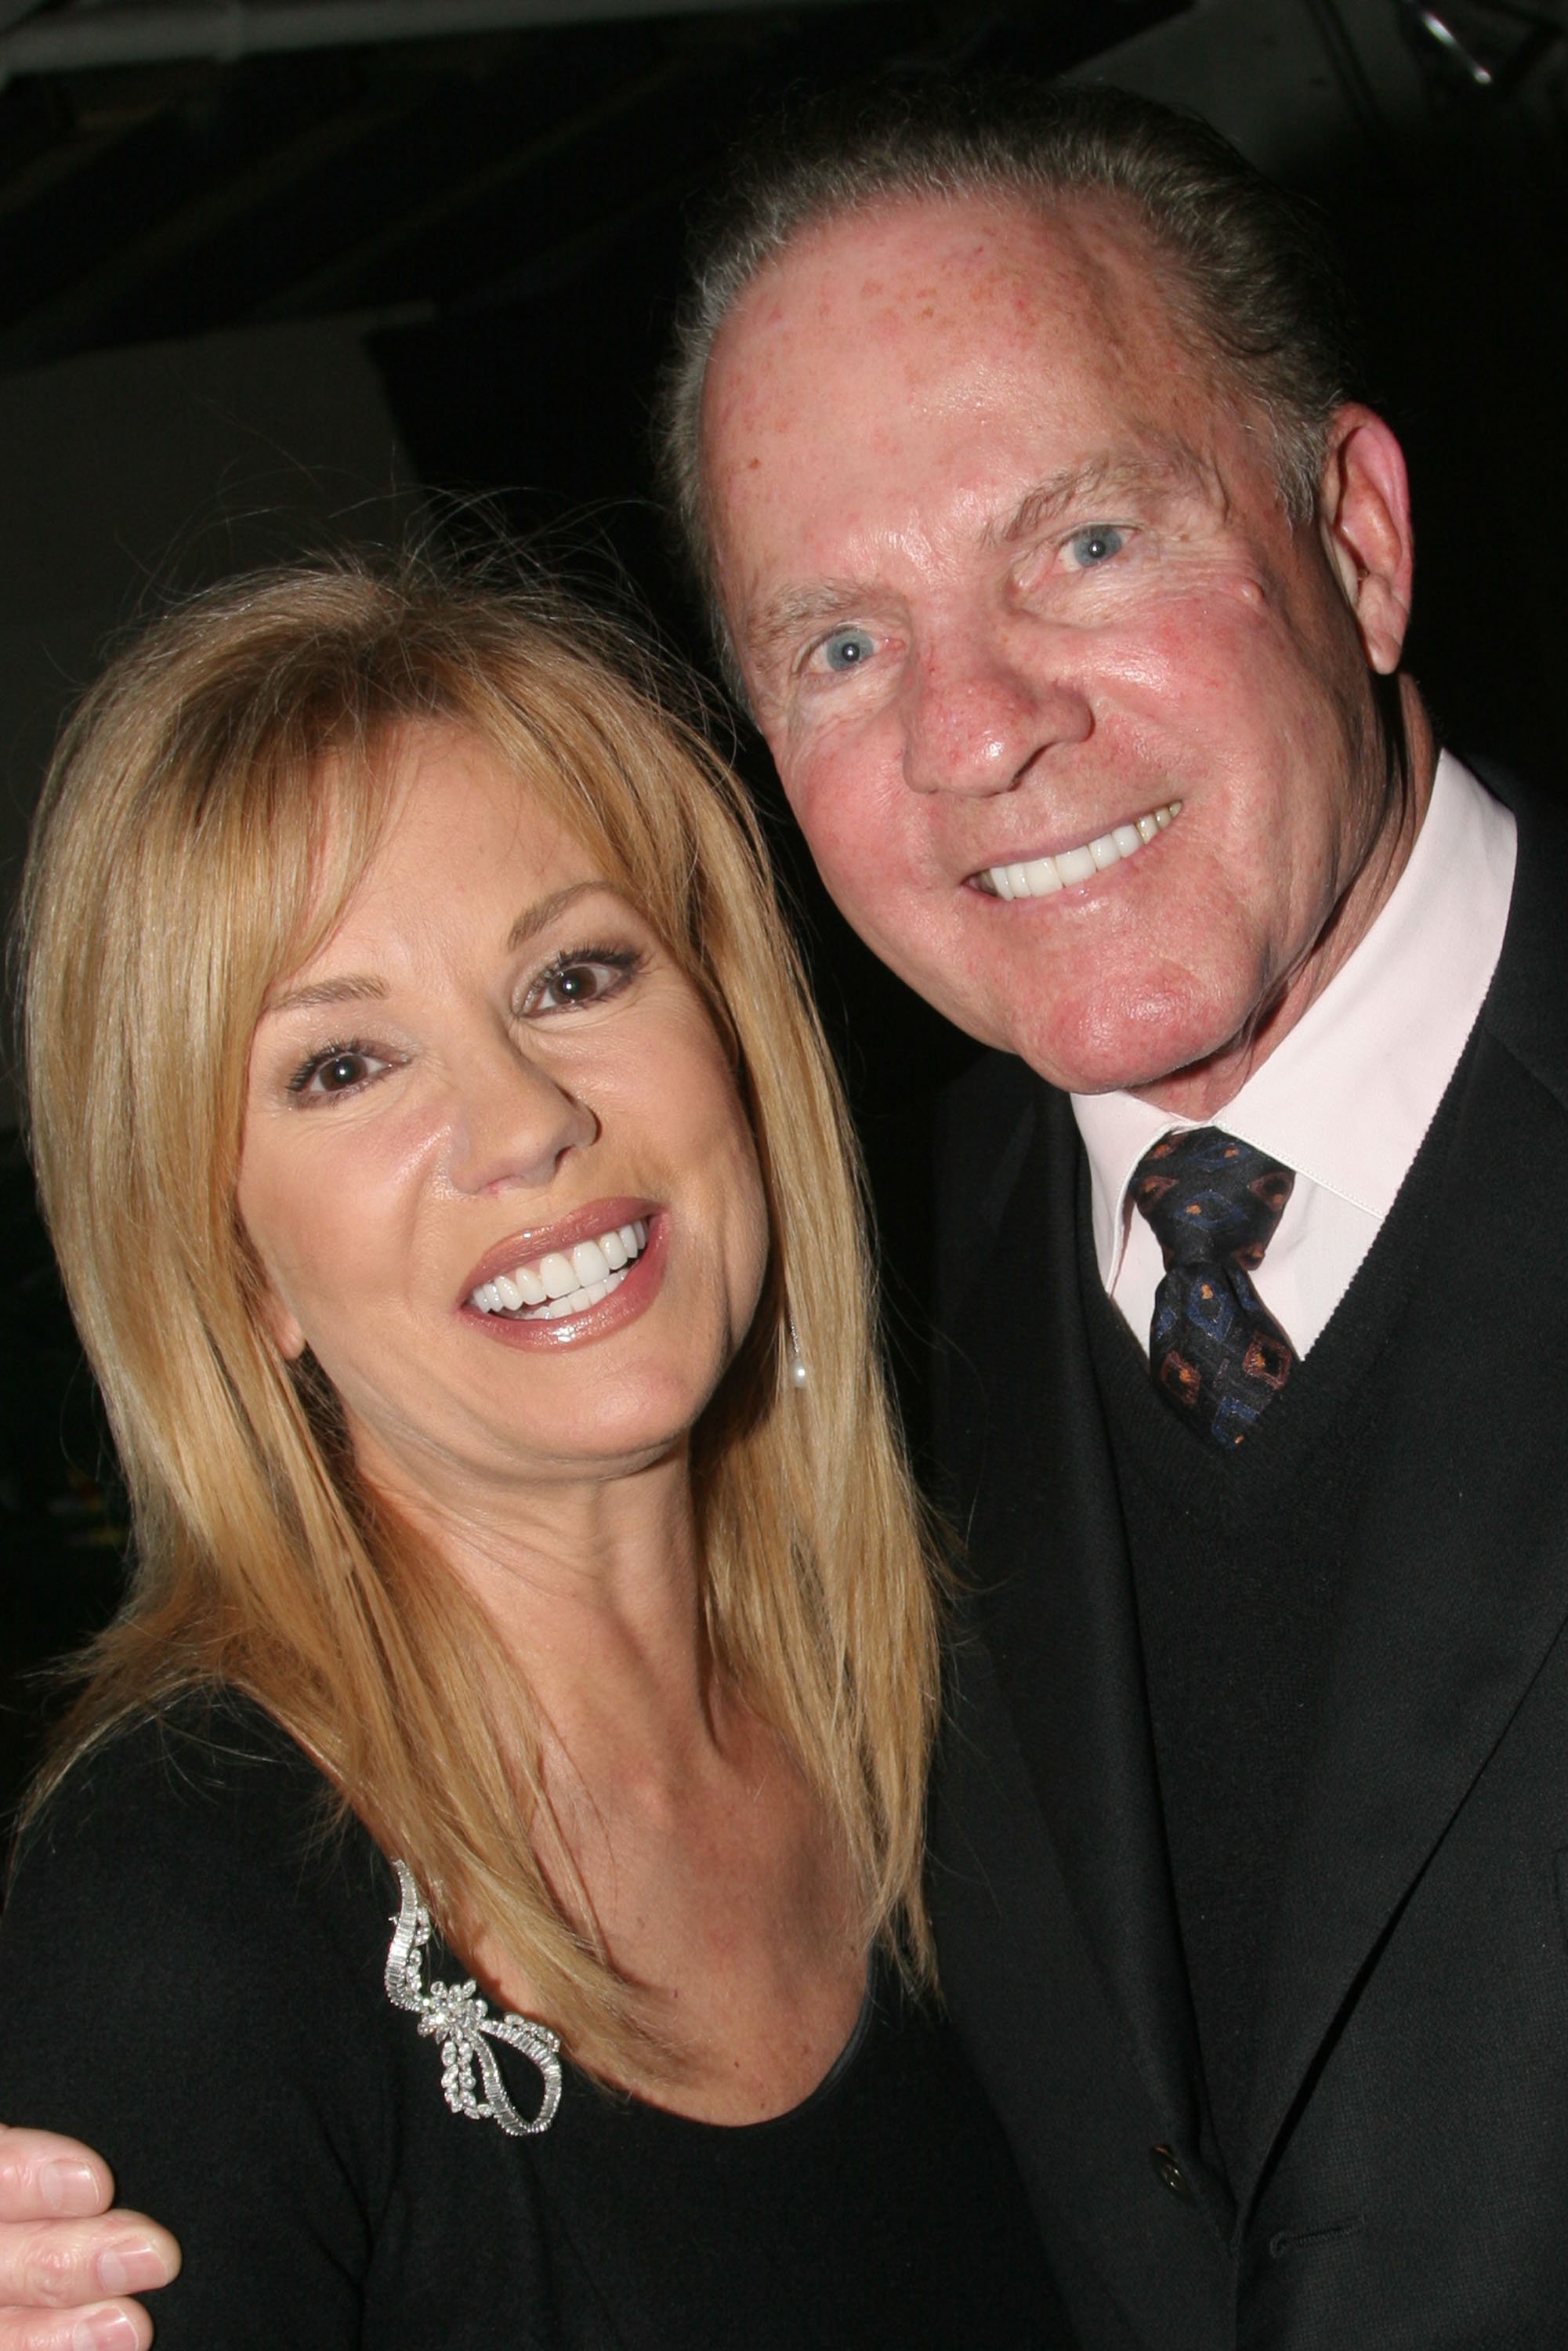 Kathie Lee and Frank Gifford during the former's new musical "Under The Bridge" - Opening Night Afterparty in New York on January 7, 2005 | Source: Getty Images